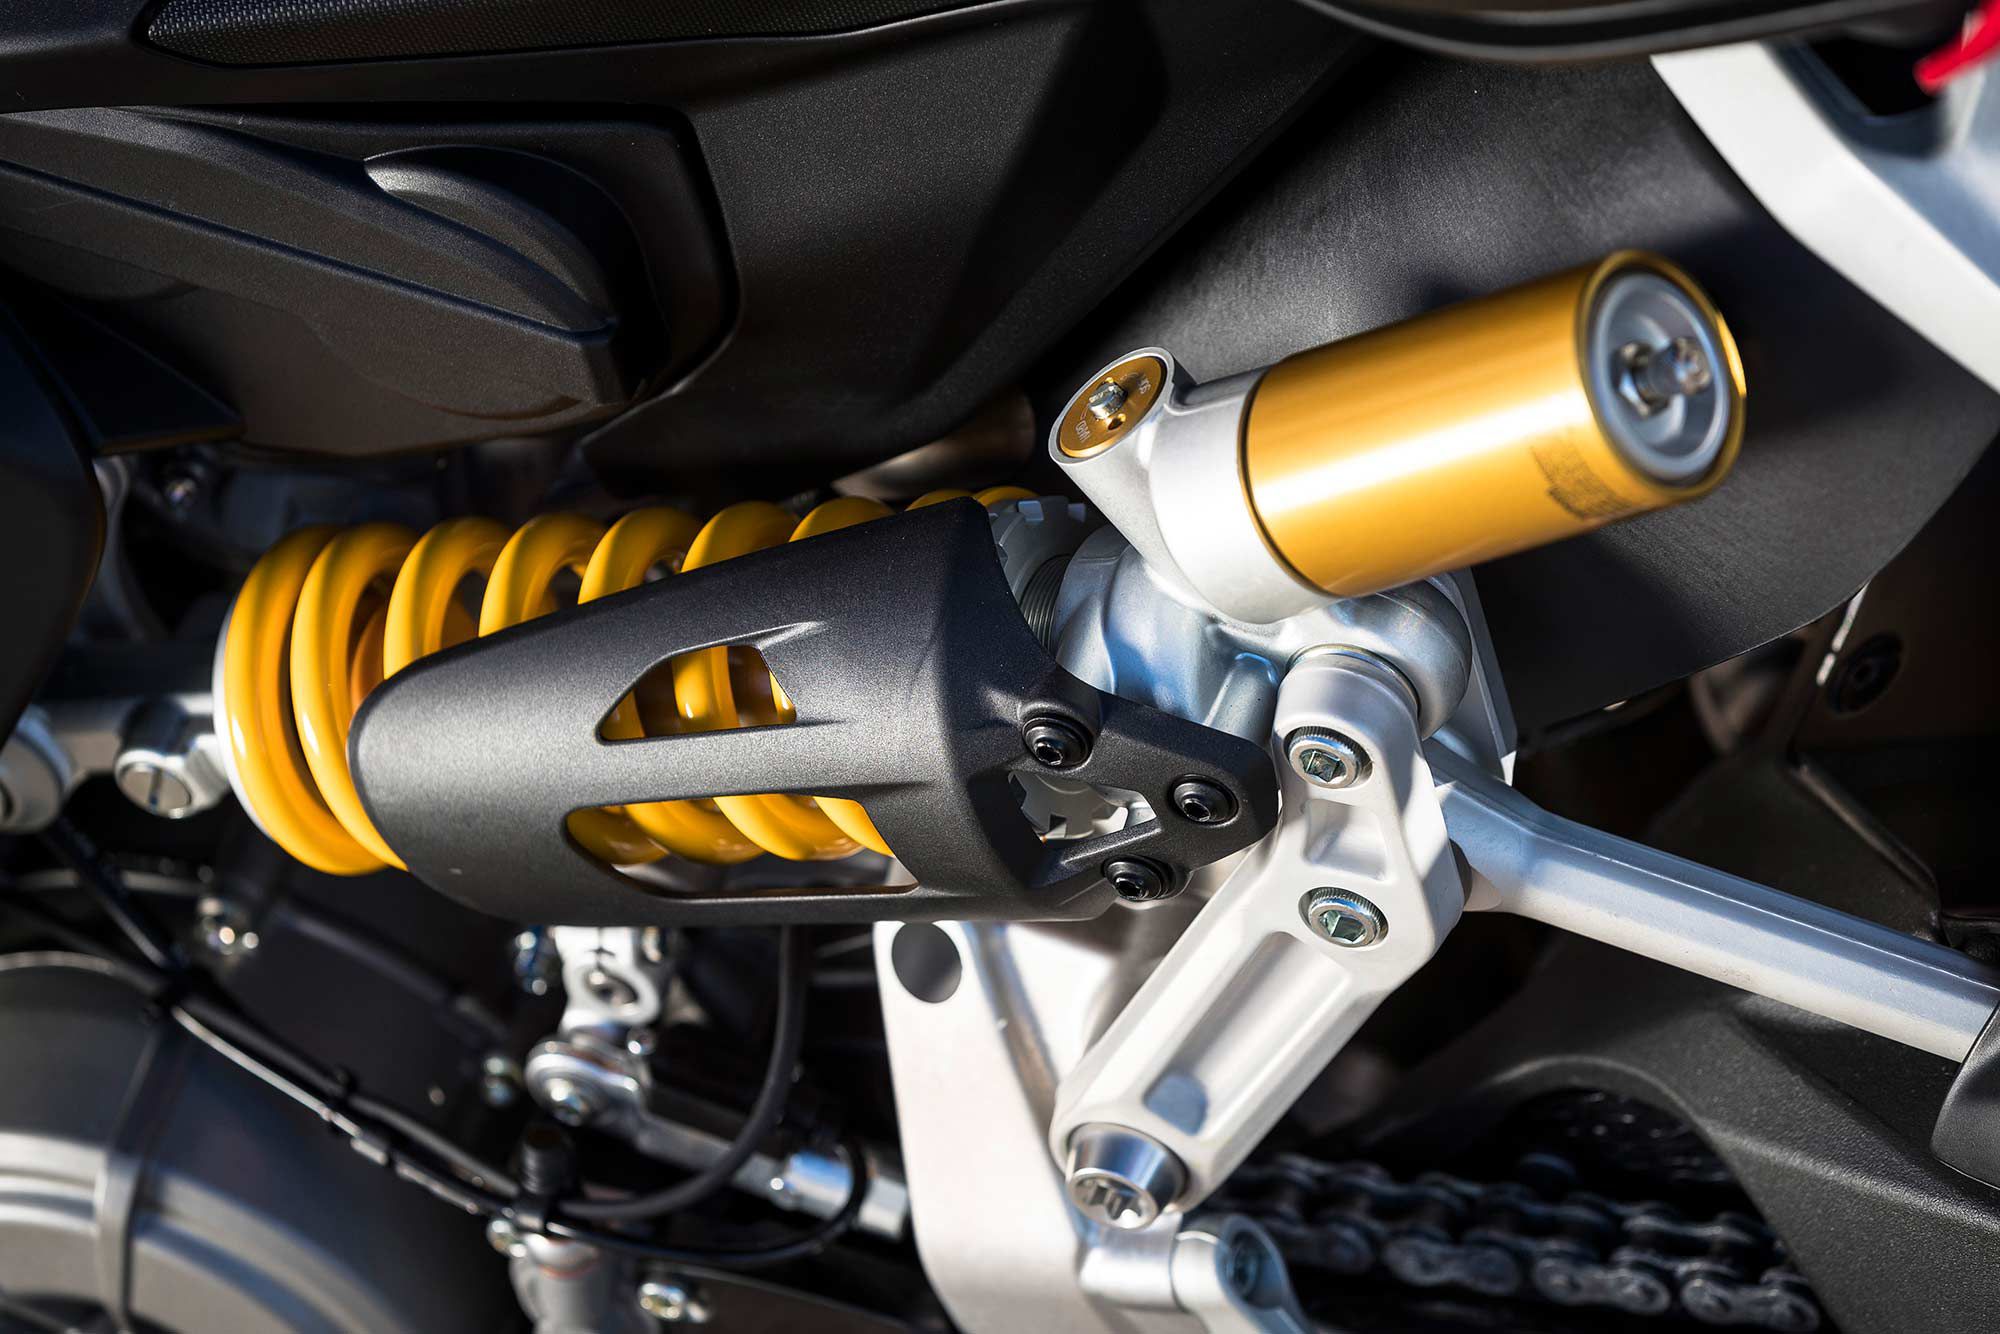 A Showa BPF fork and Sachs shock are resilient enough for racetrack conditions and balanced enough for on-road comfort.